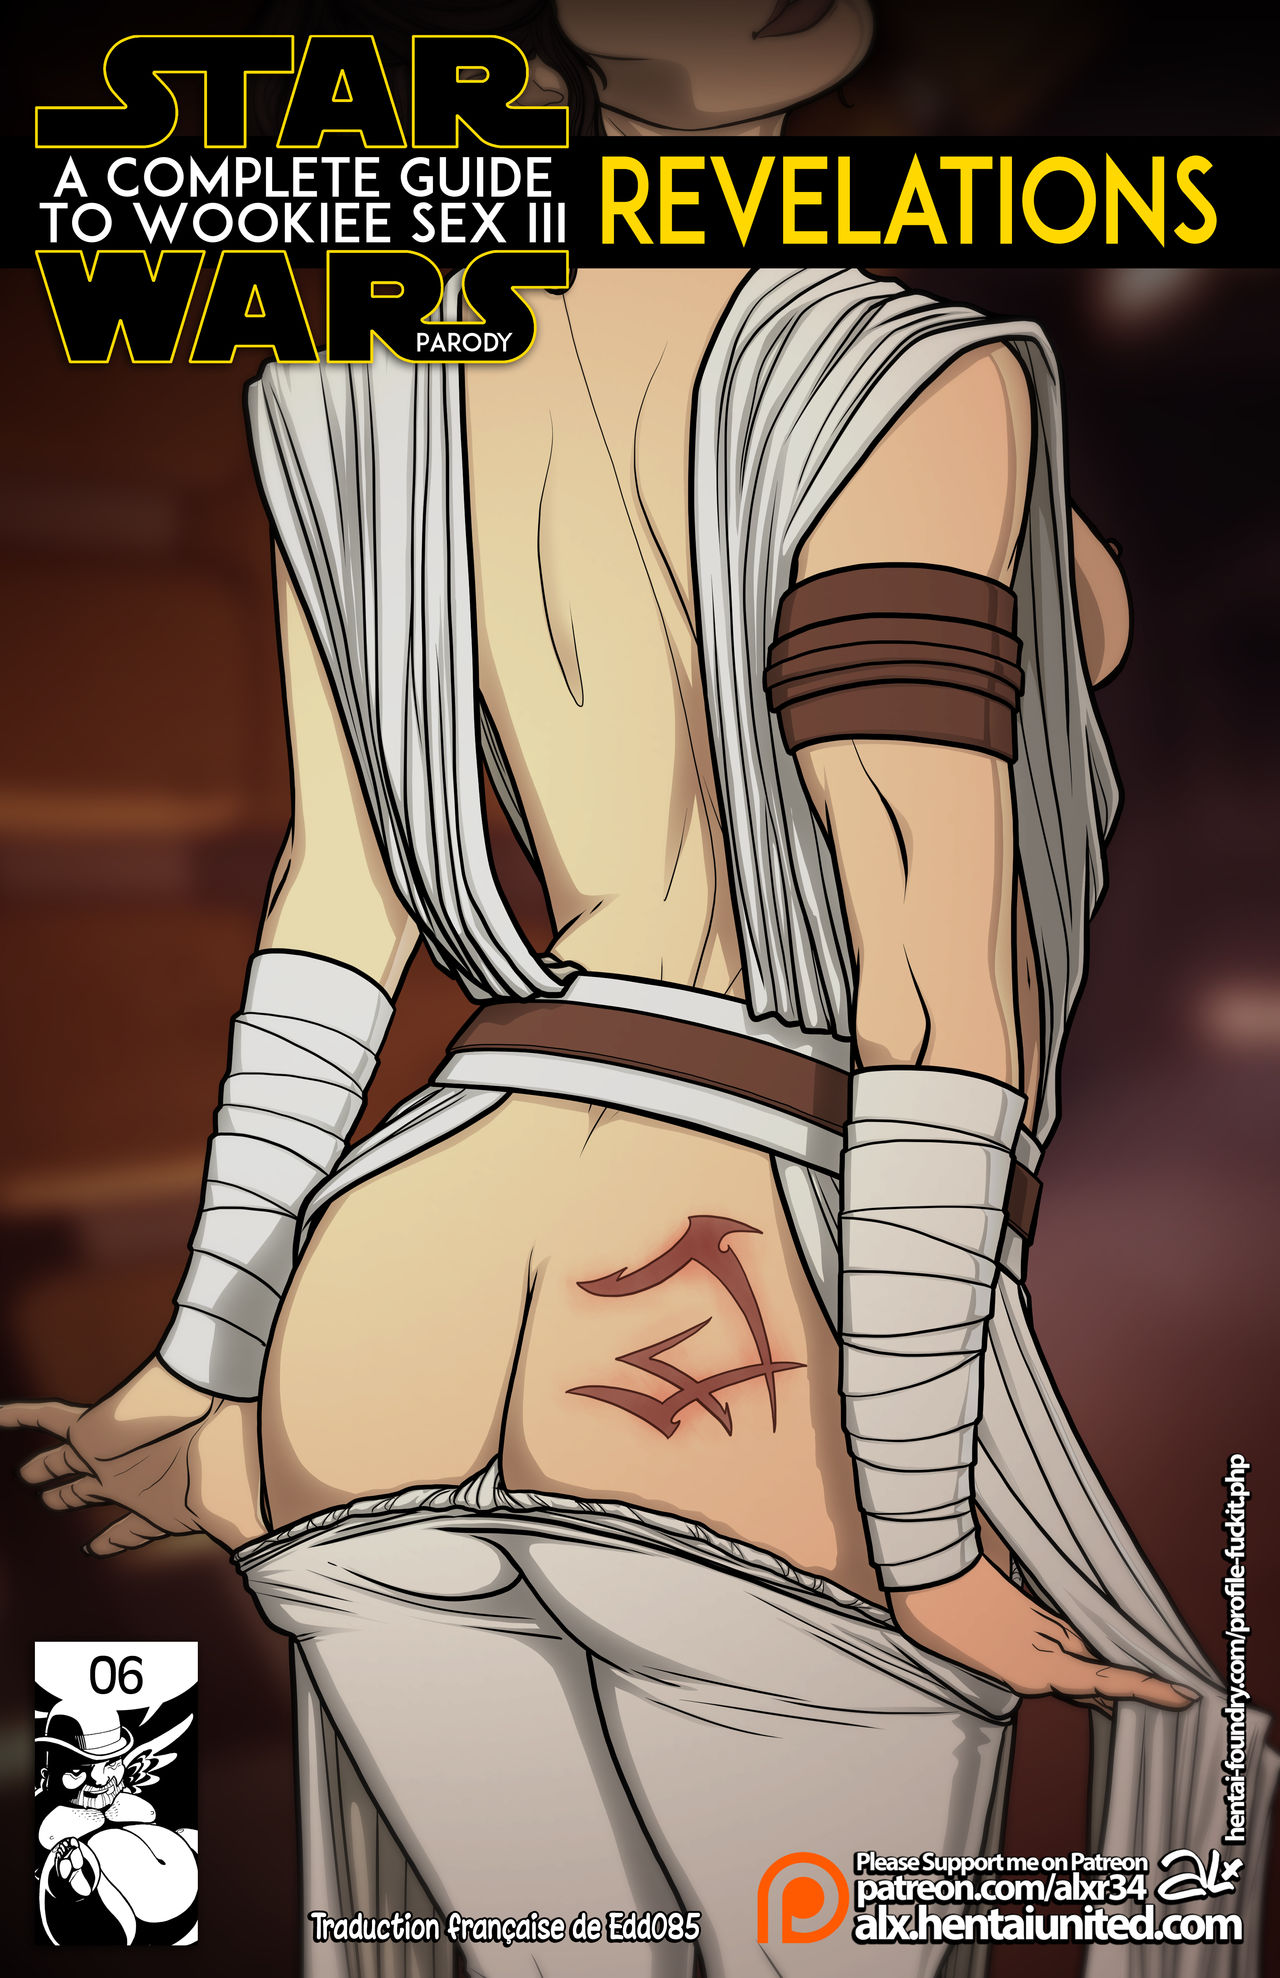 Star Wars : A Complete Guide to Wookie Sex 3